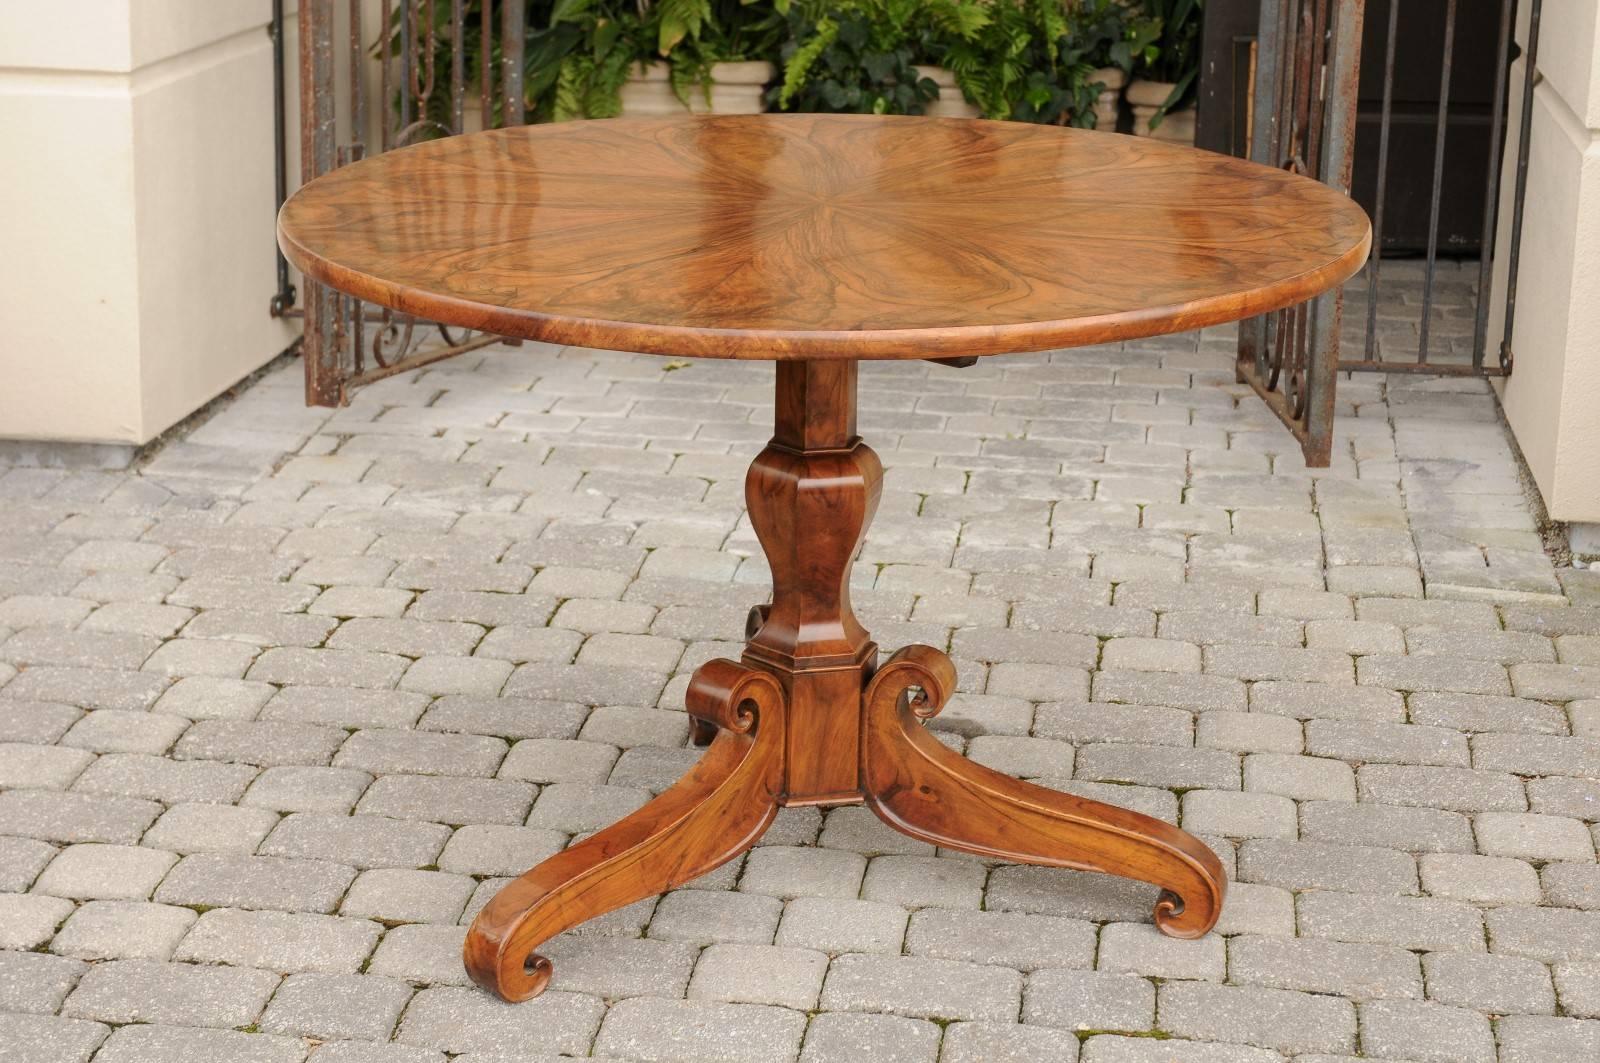 This Biedermeier pedestal from Austria features an exquisite burl walnut circular top. The grain gives it an almost floral, rosette type motif. The central turned pedestal is raised on tripod base, made of delicate volutes. The Biedermeier style was